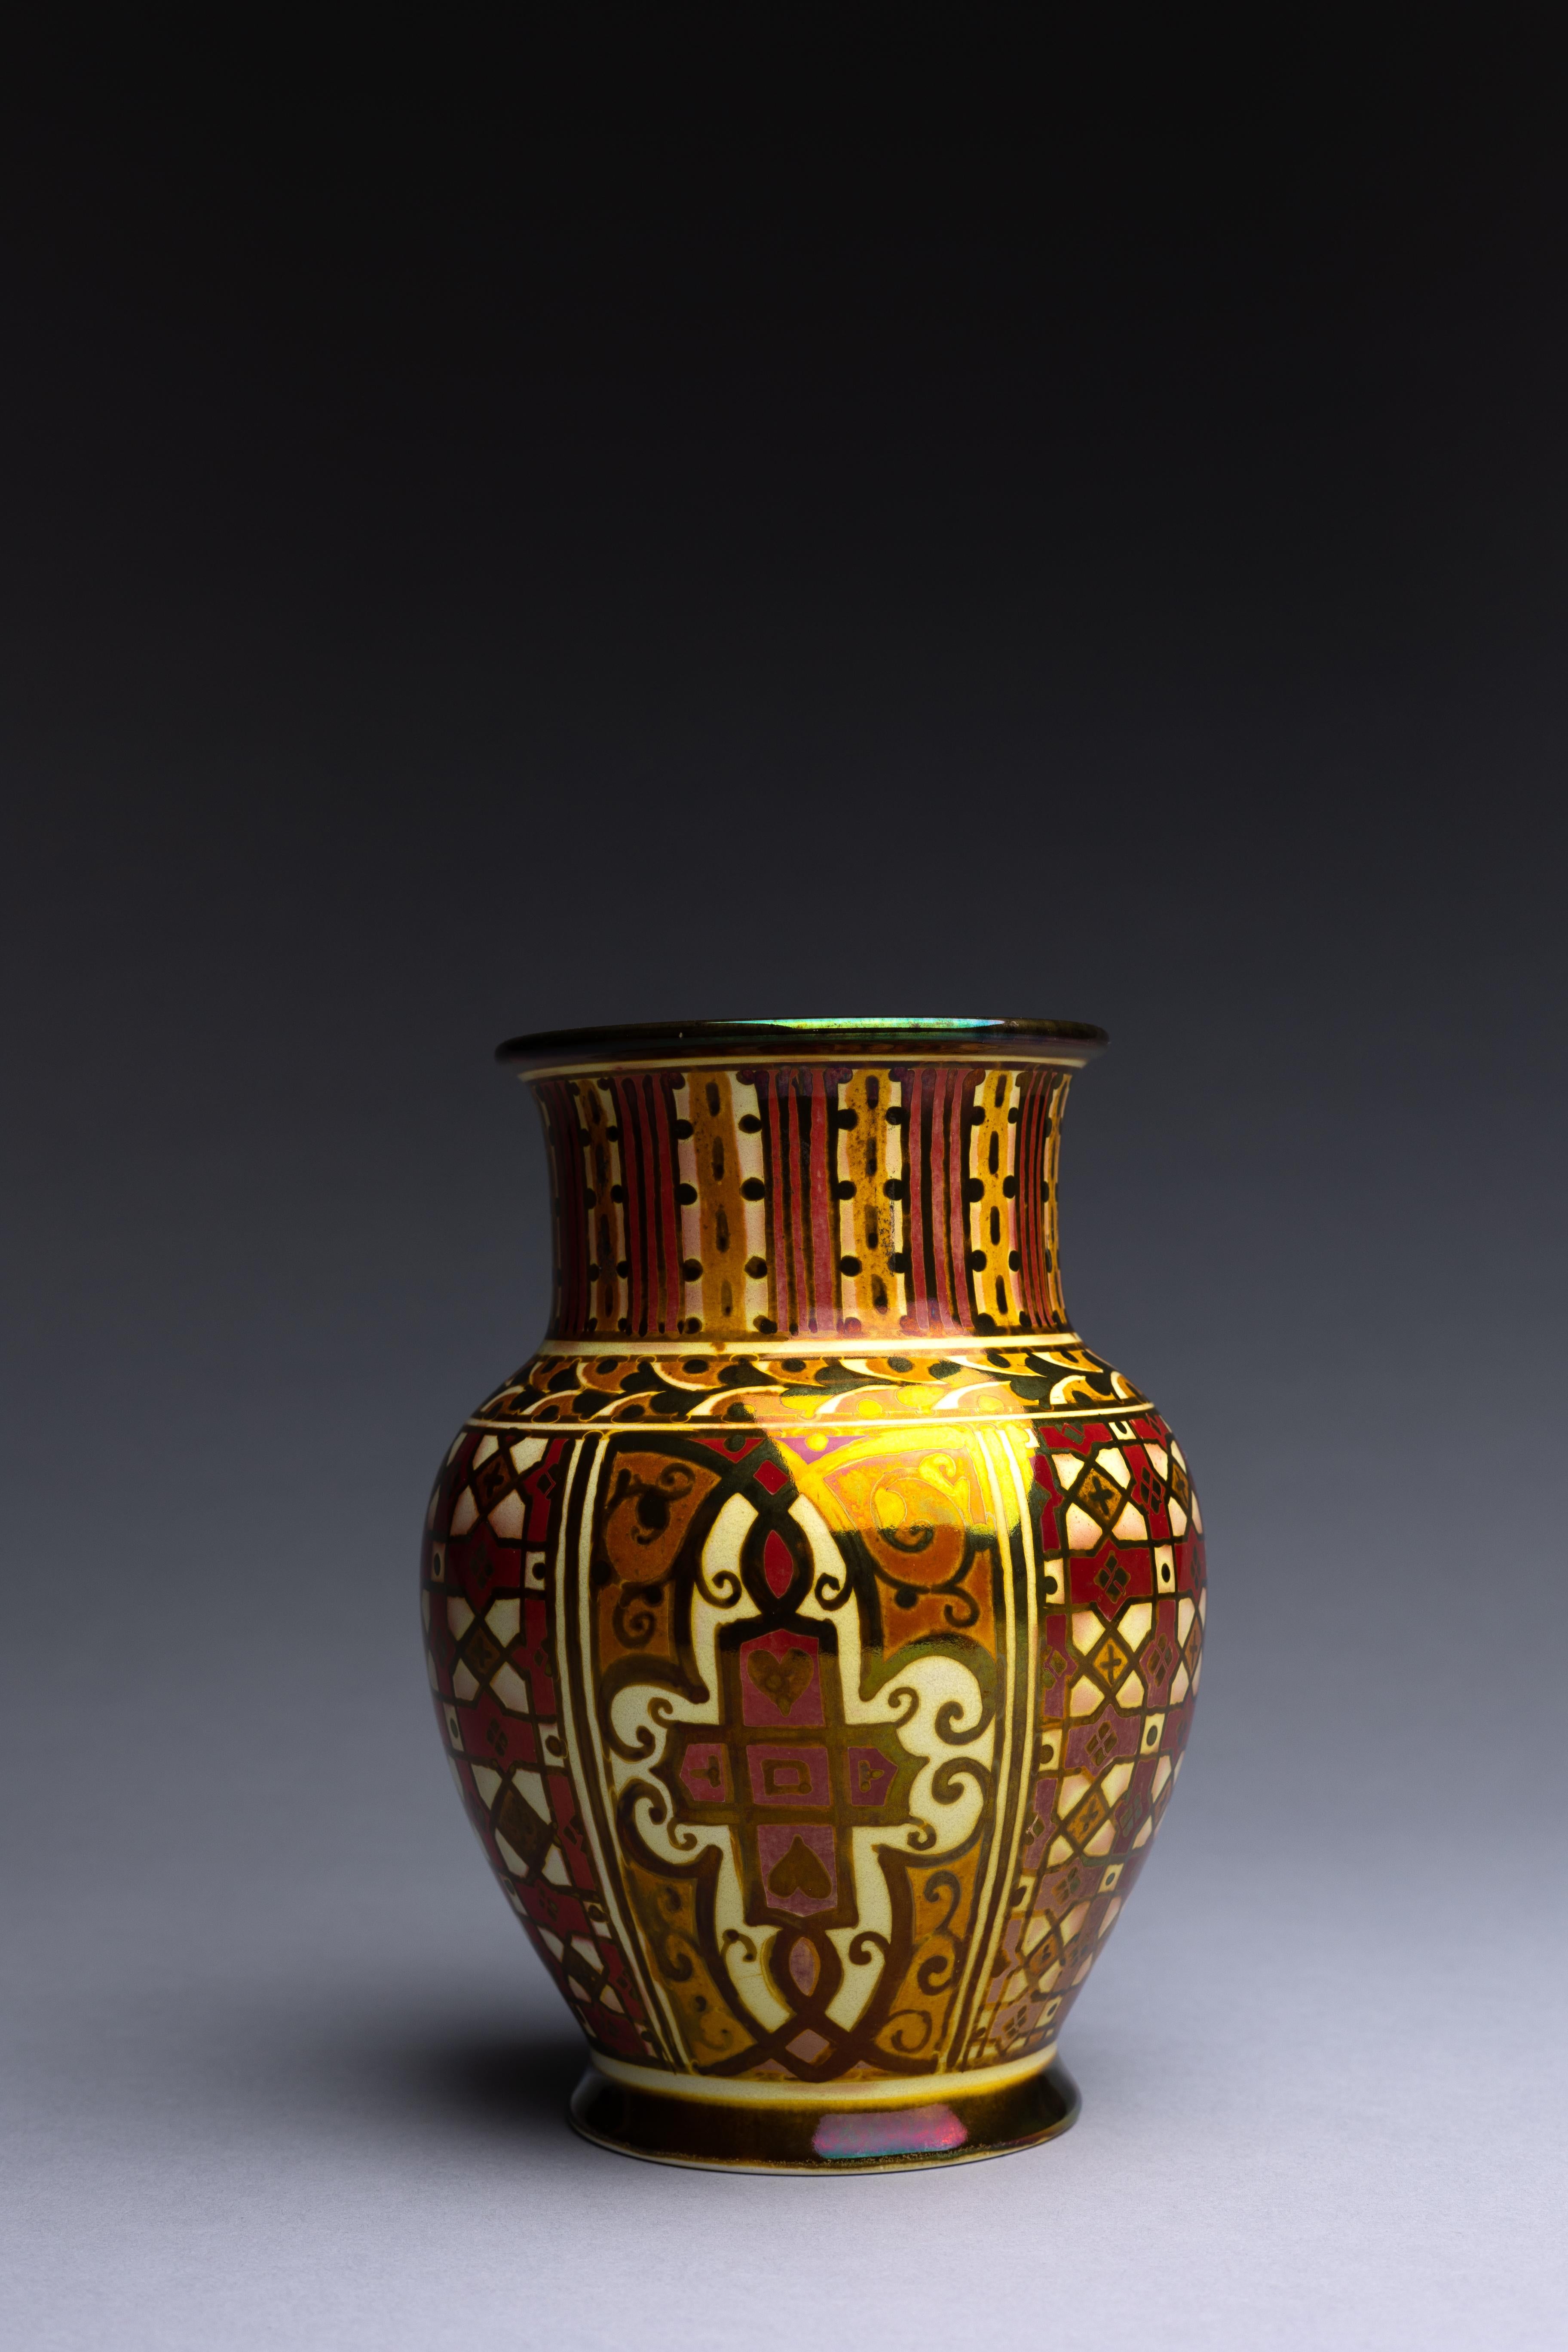 Art Deco Red and Gold Lustre Vase by William S. Mycock for Pilkingtons Royal Lancastrian For Sale